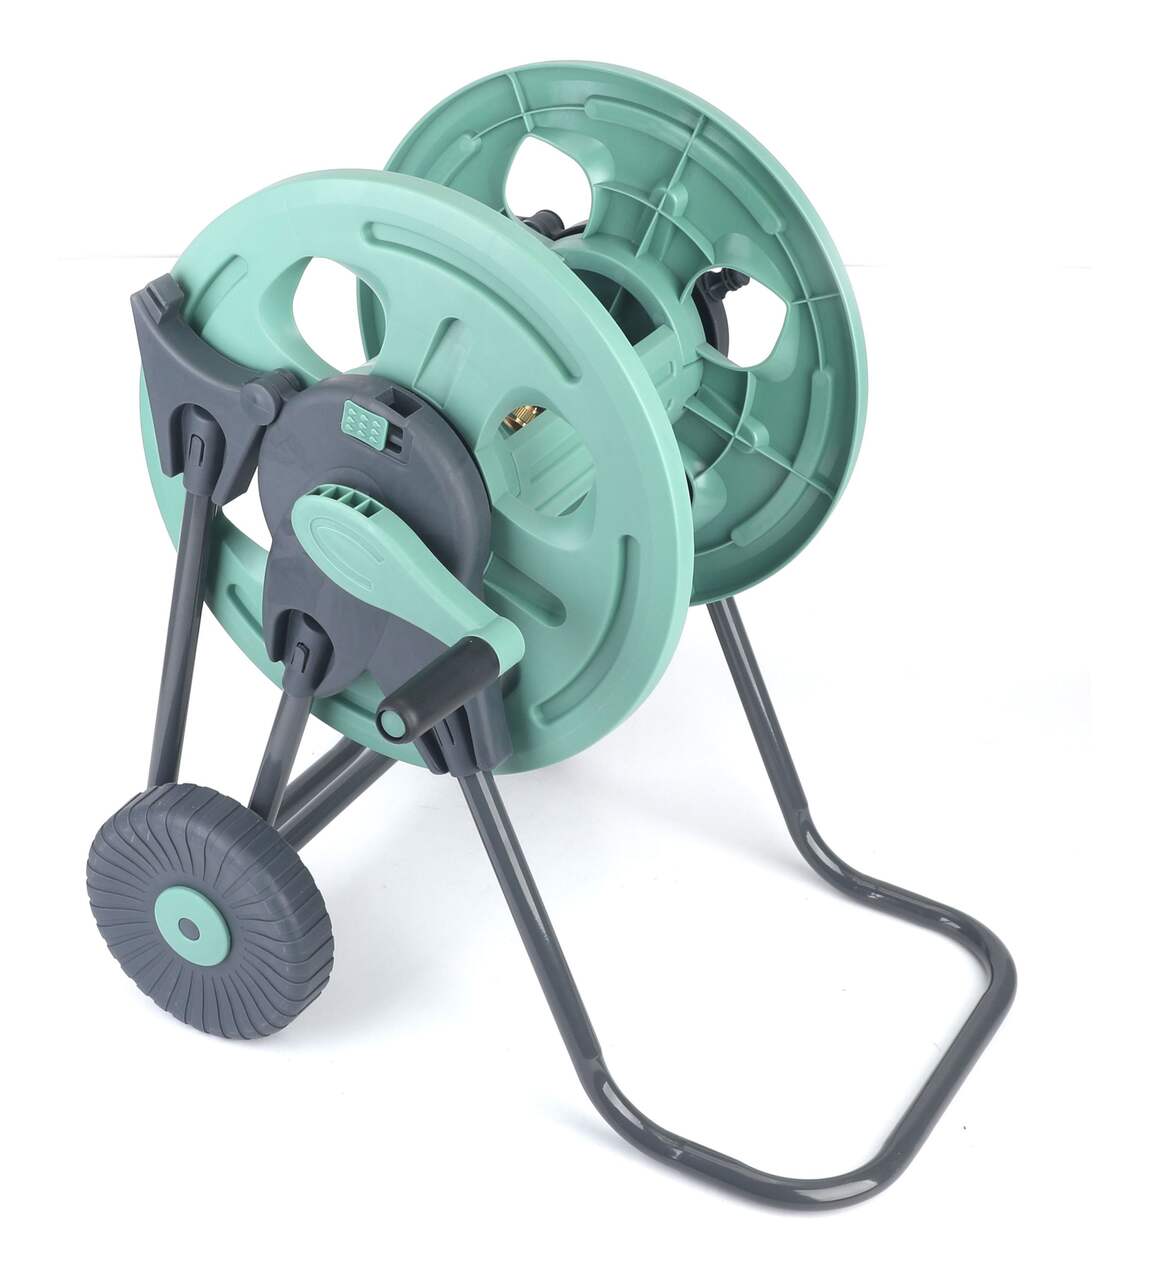 Small Hose Reel for Cart or Caddy